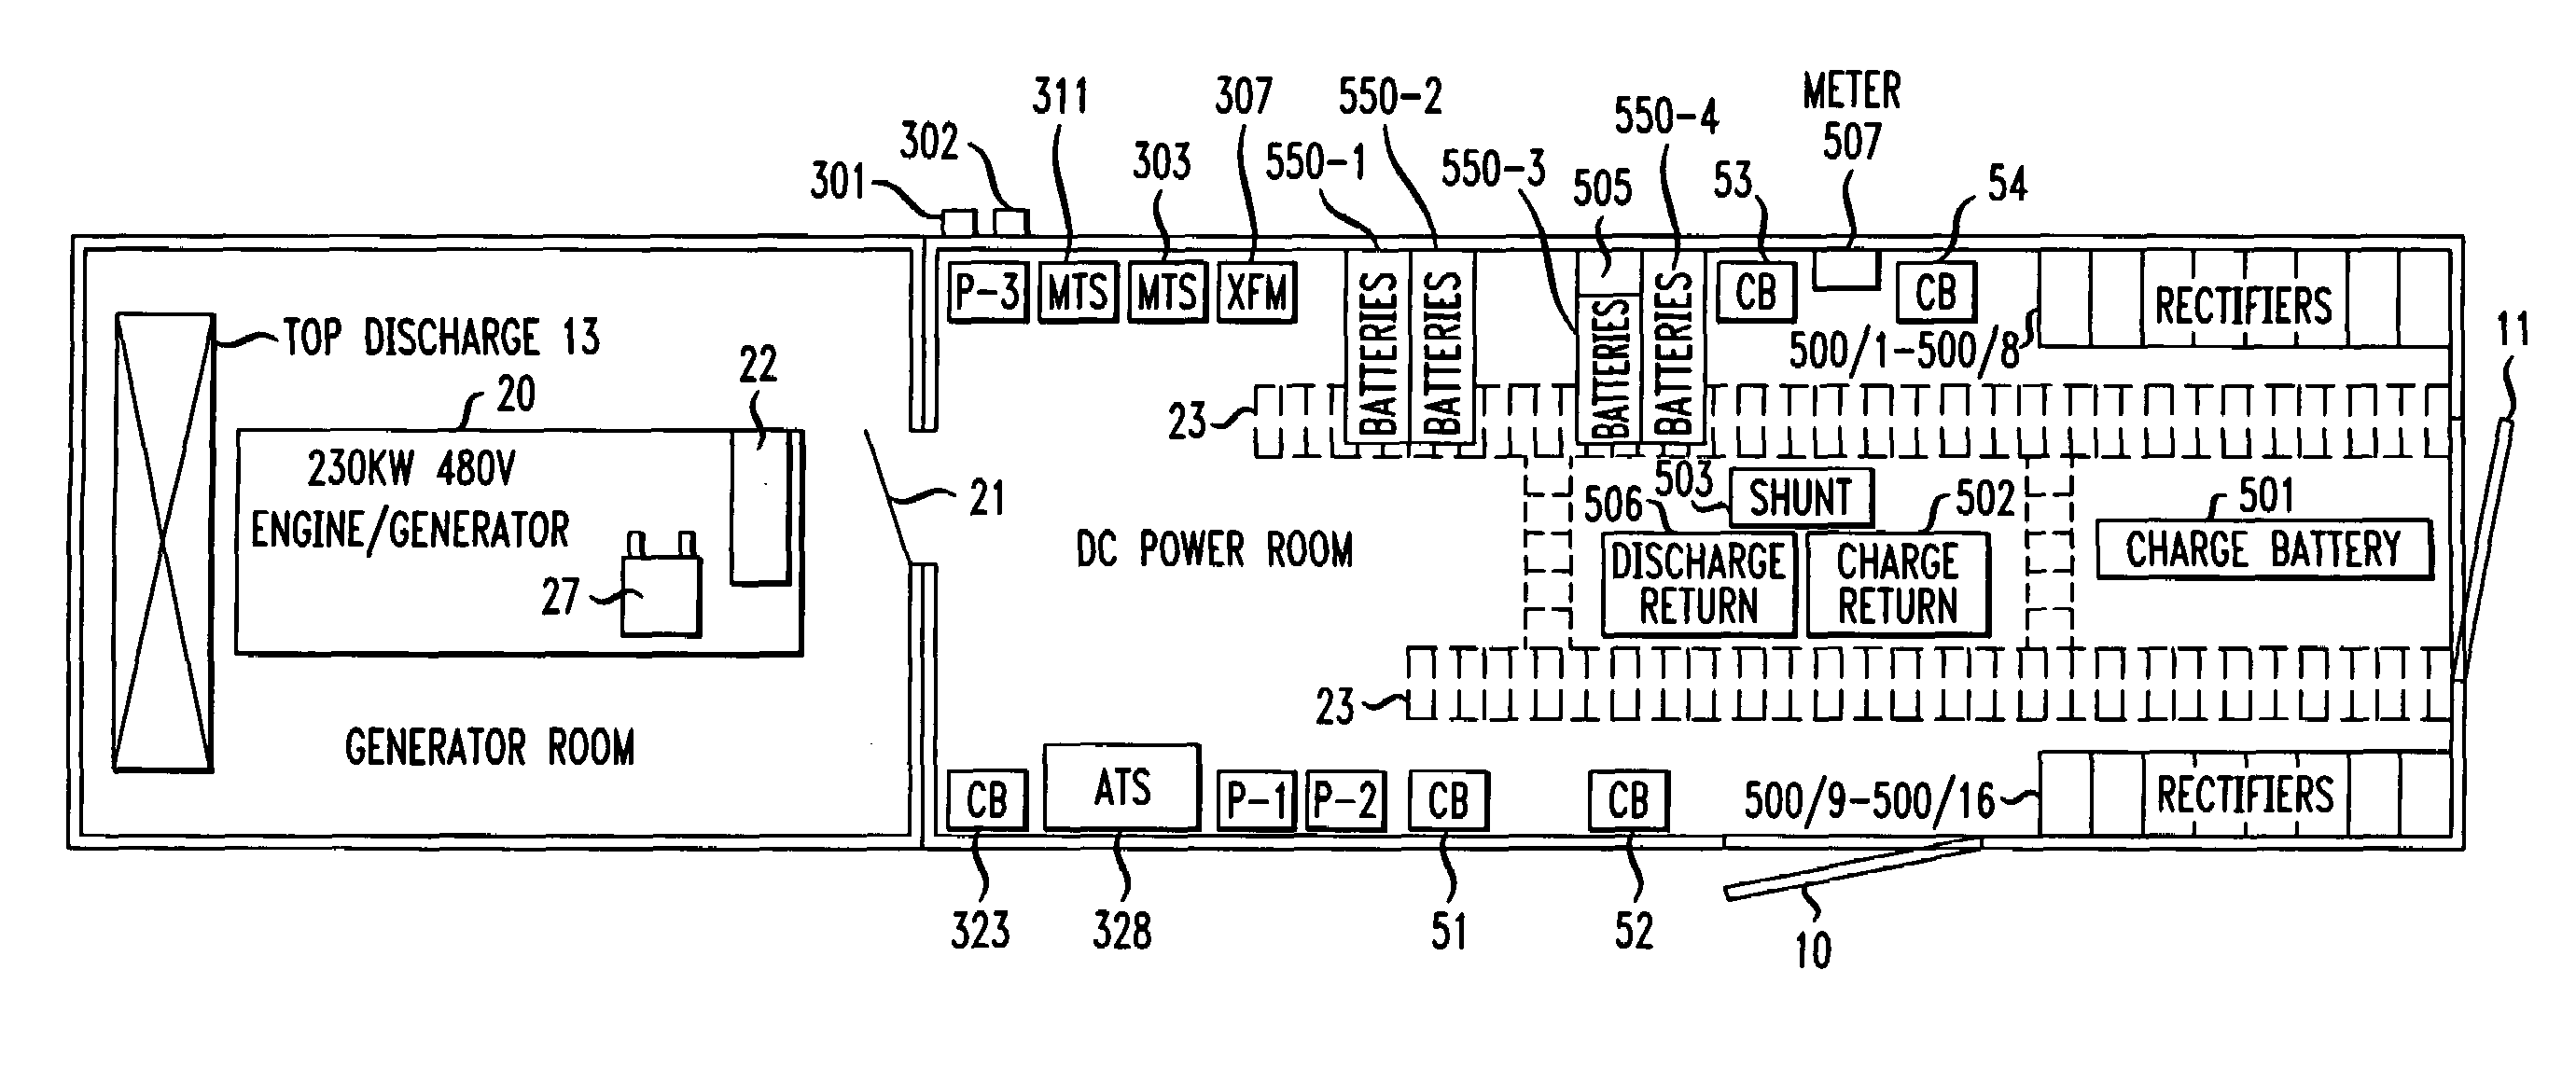 Mobile AC-to-DC power conversion system